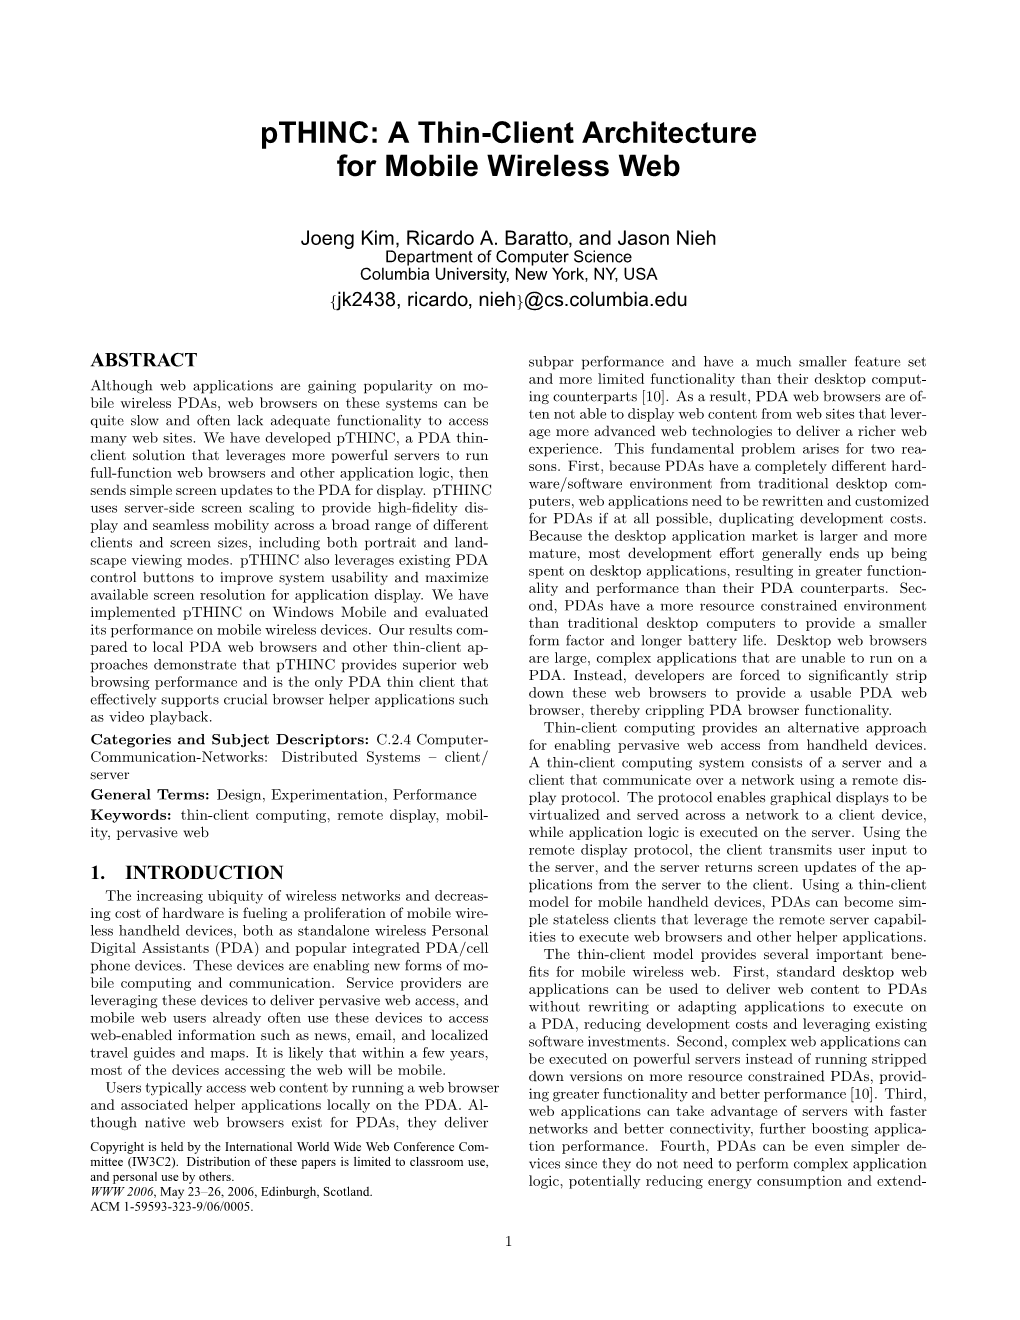 A Thin-Client Architecture for Mobile Wireless Web